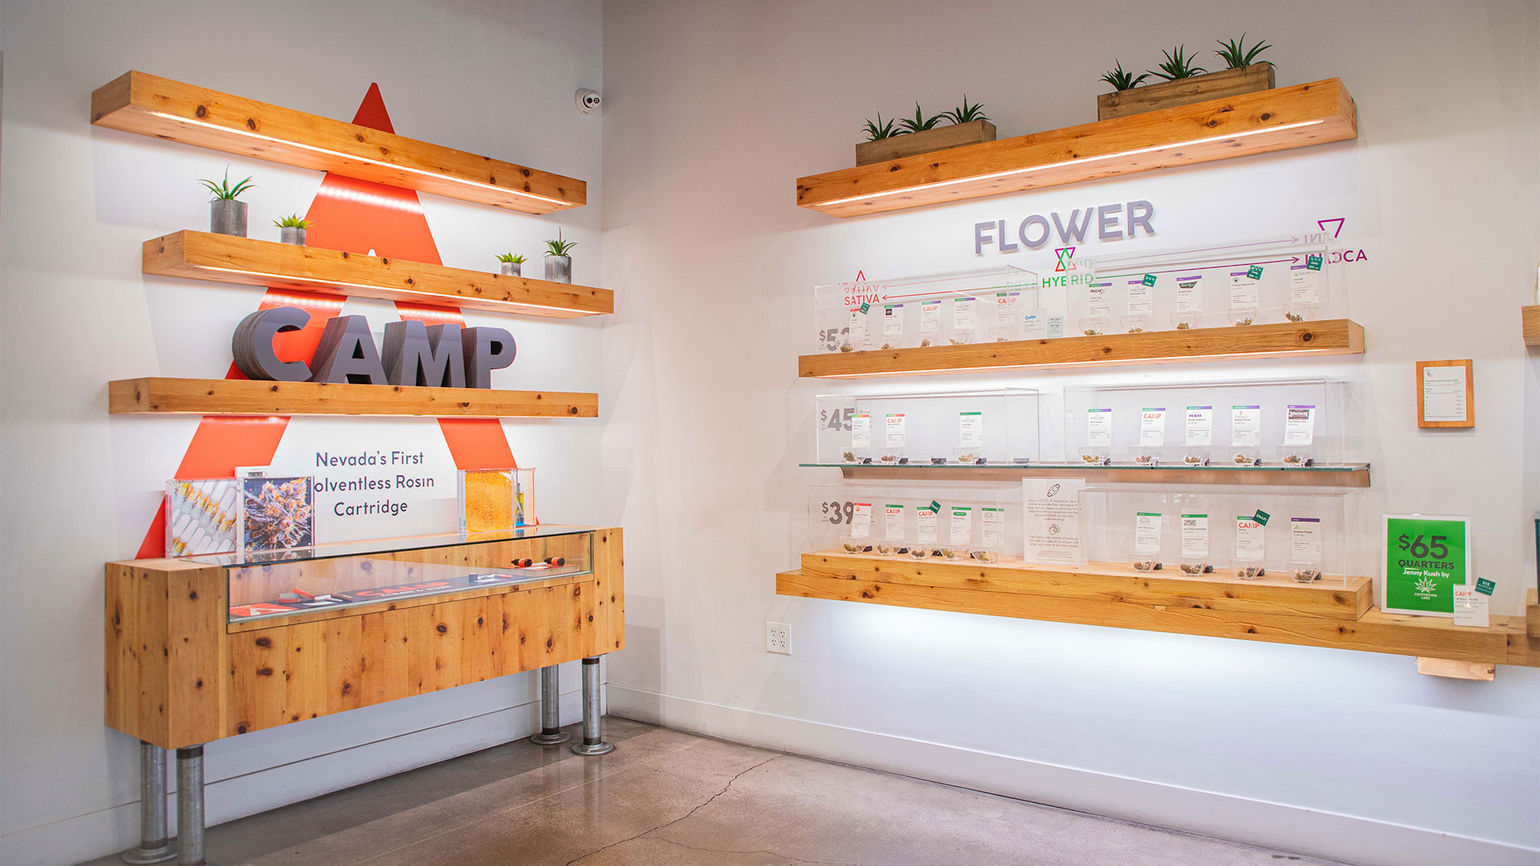 Las Vegas weed lounges are closer to becoming a reality: Travel Weekly